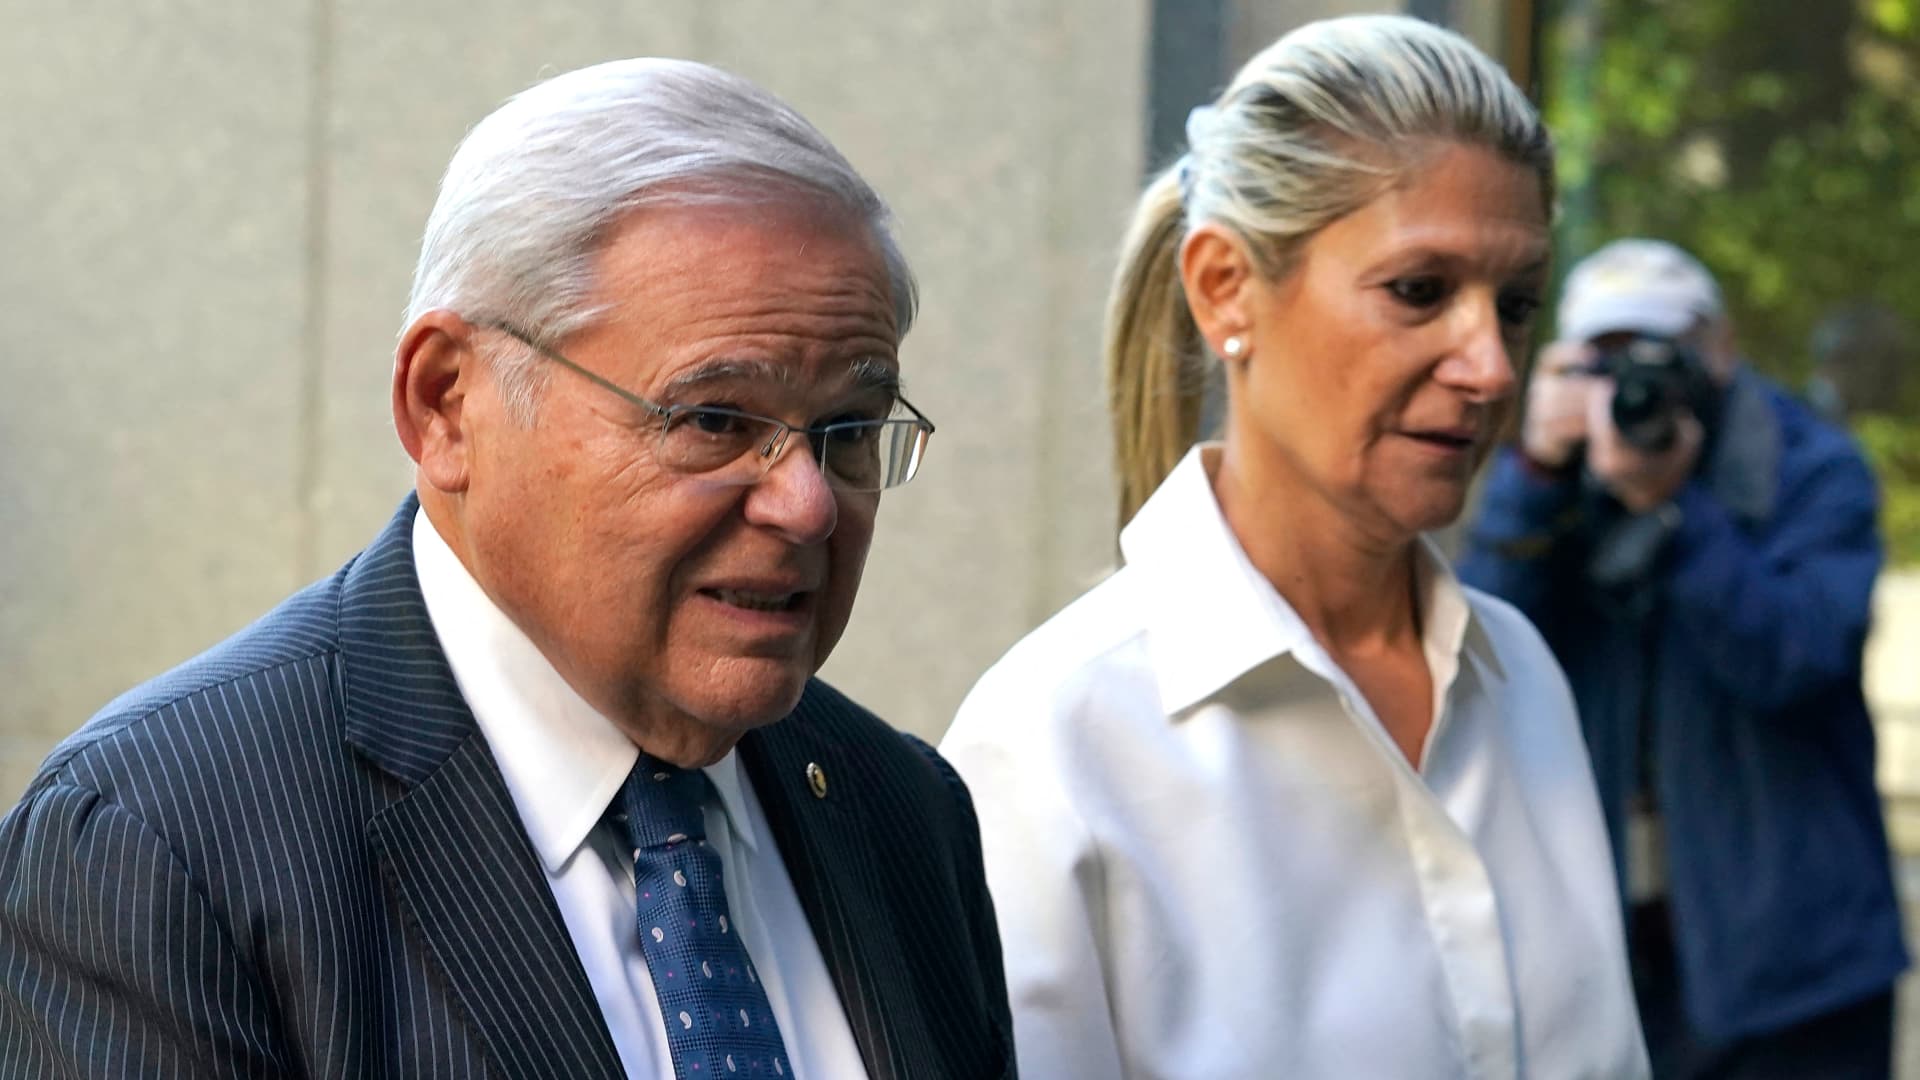 Senator Menendez's wife has breast cancer, he reveals during the corruption trial